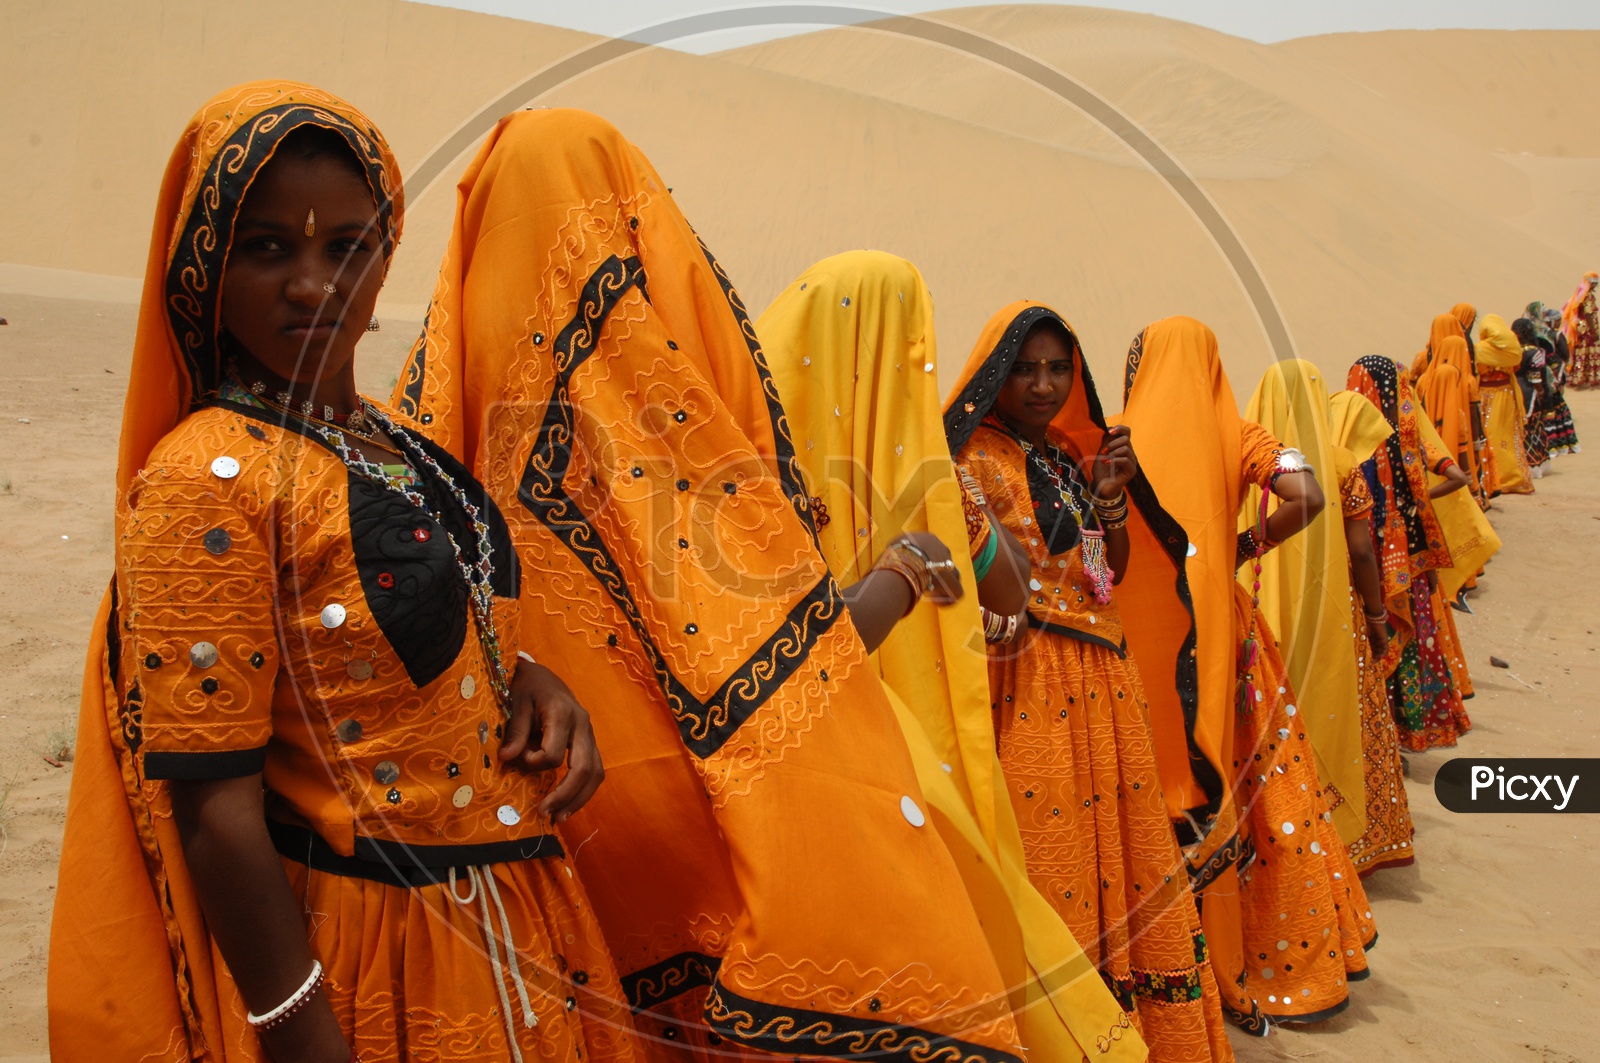 Indian women in a getup